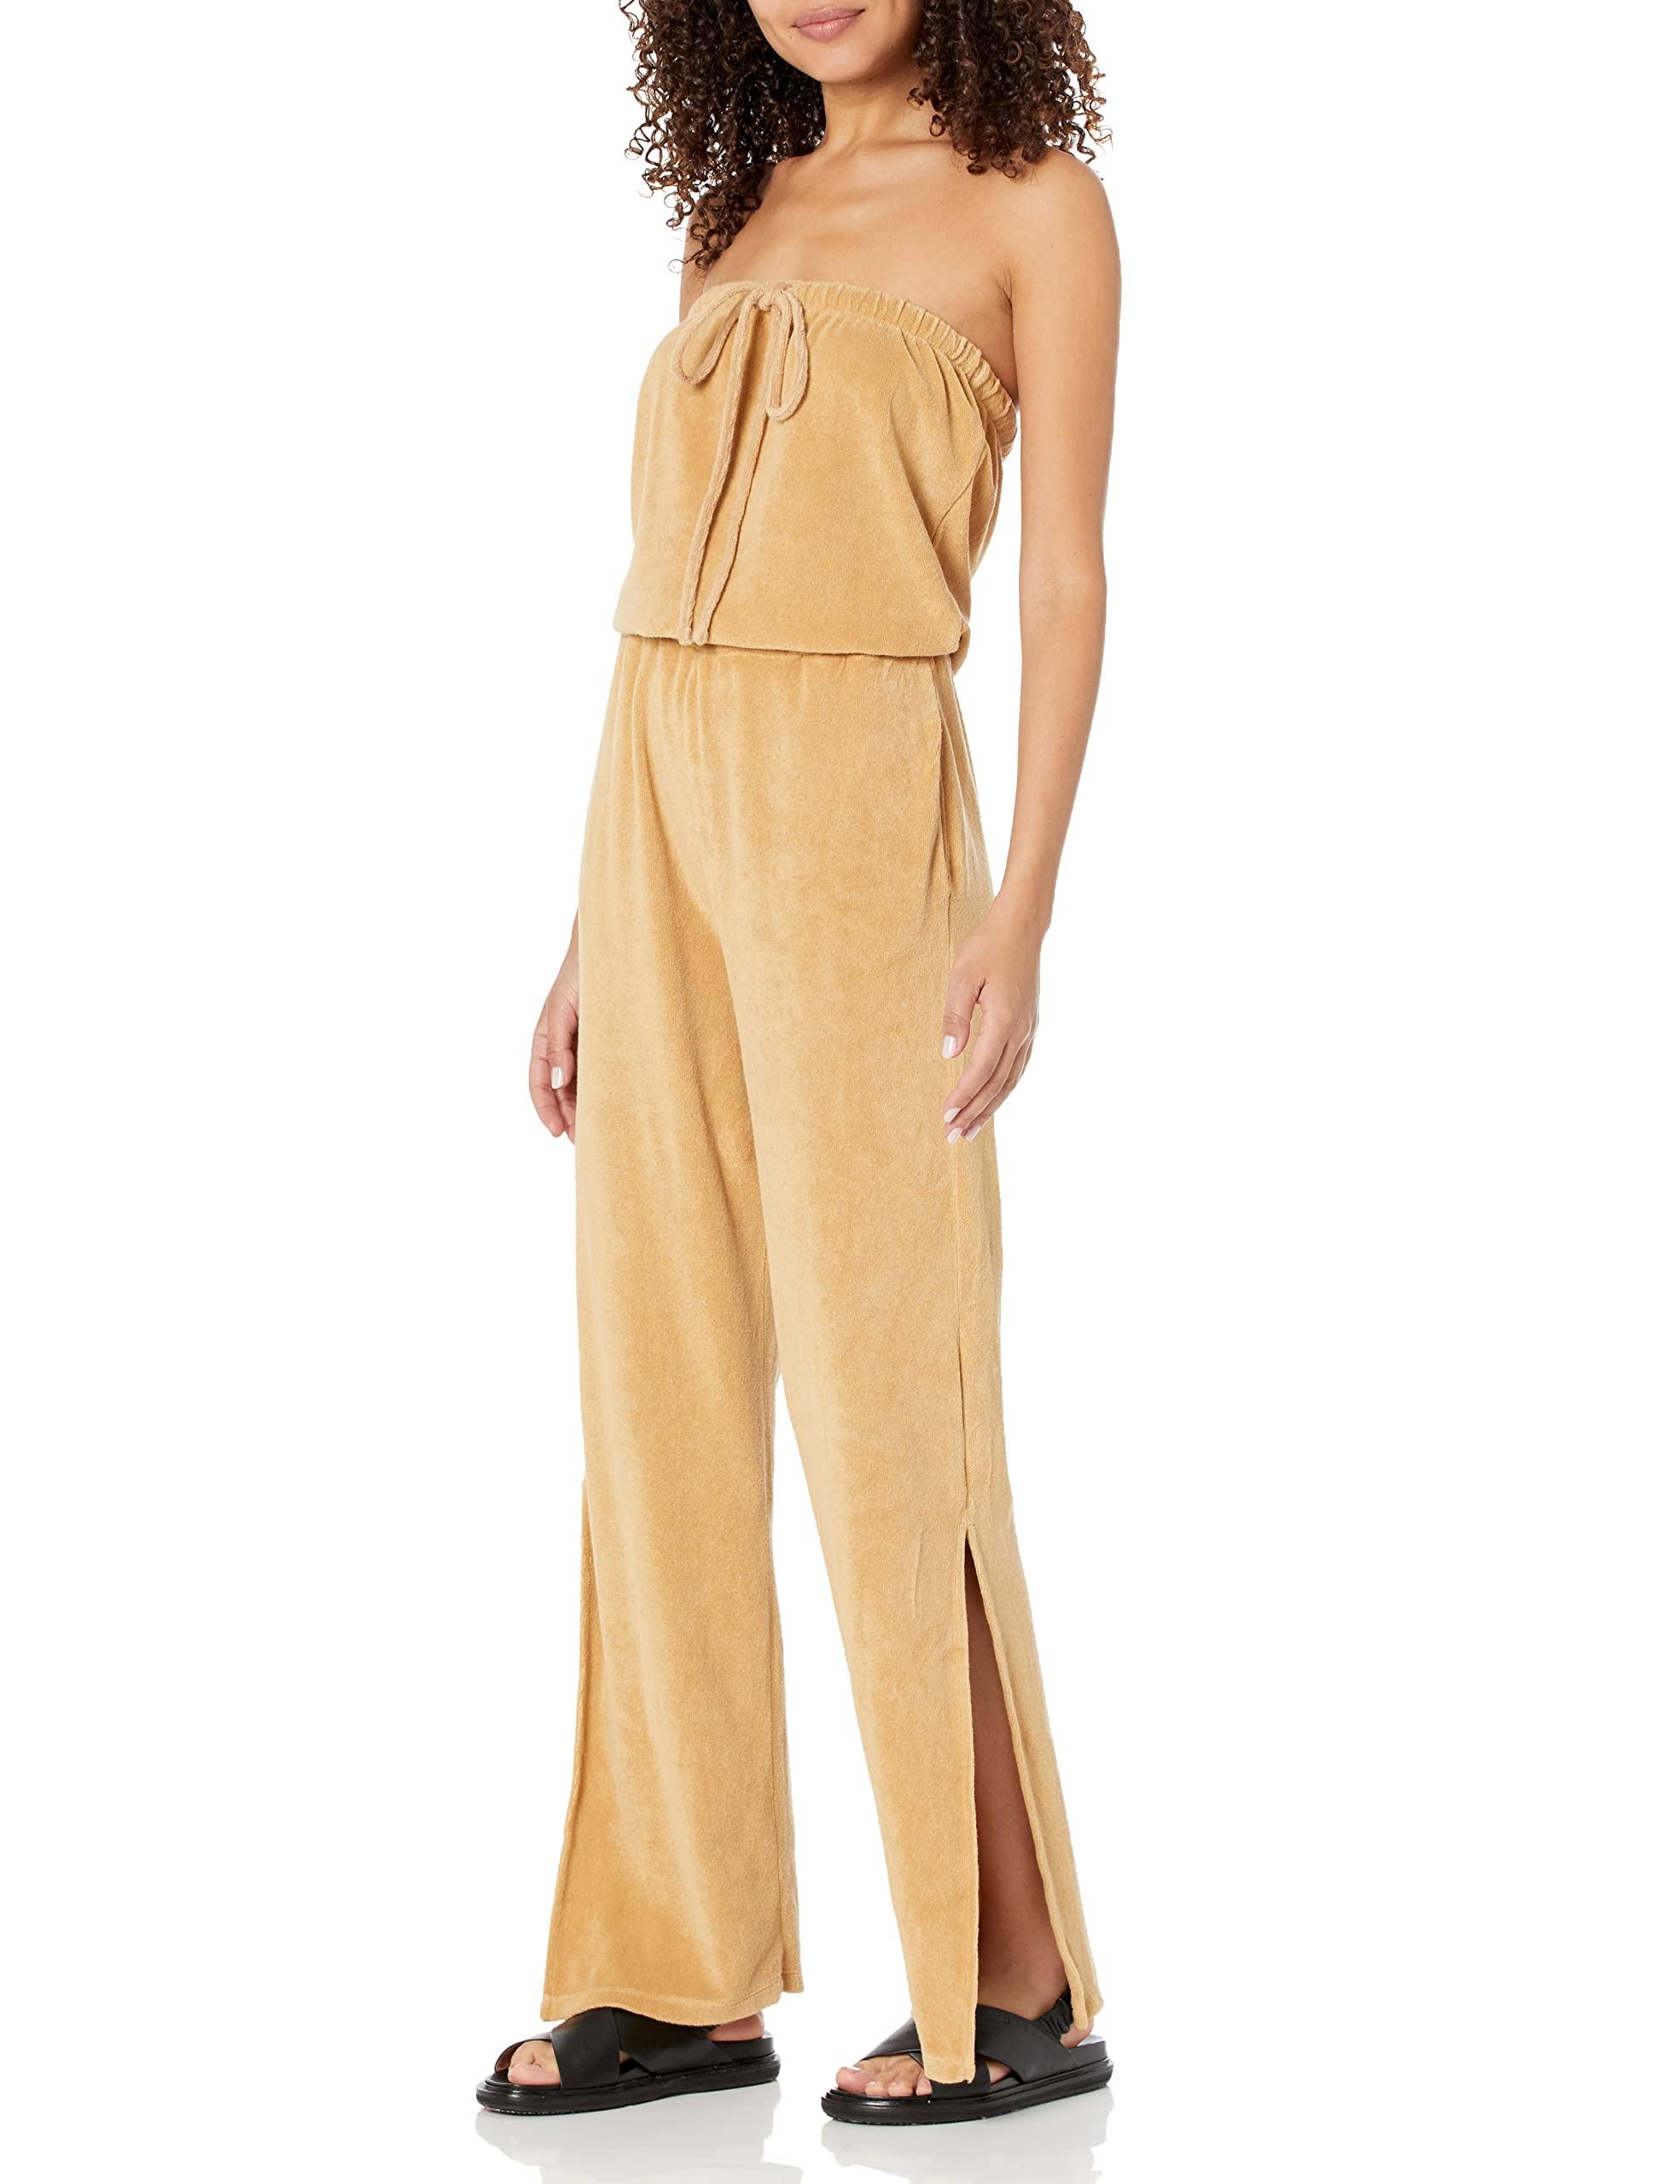 Monrow S Hr0145-terry Cloth Bandeau Jumpsuit in Natural | Lyst